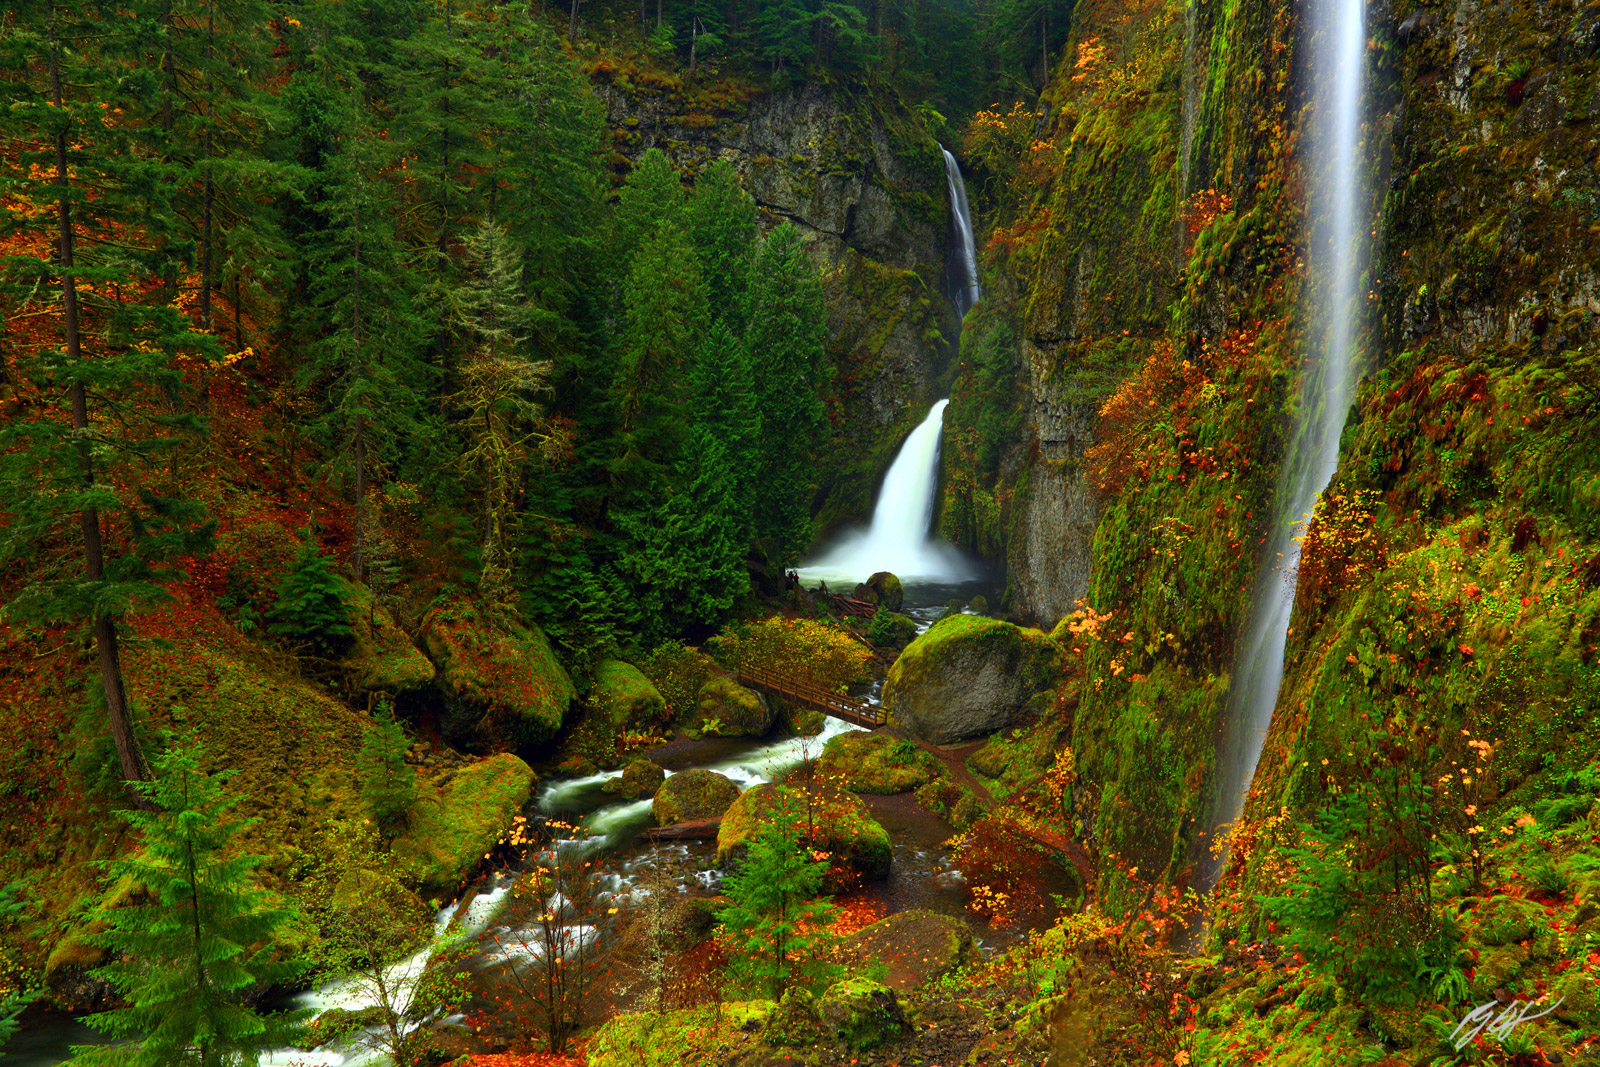 Wahclella Falls in the Columbia River Gorge National Scenic Area in Oregon